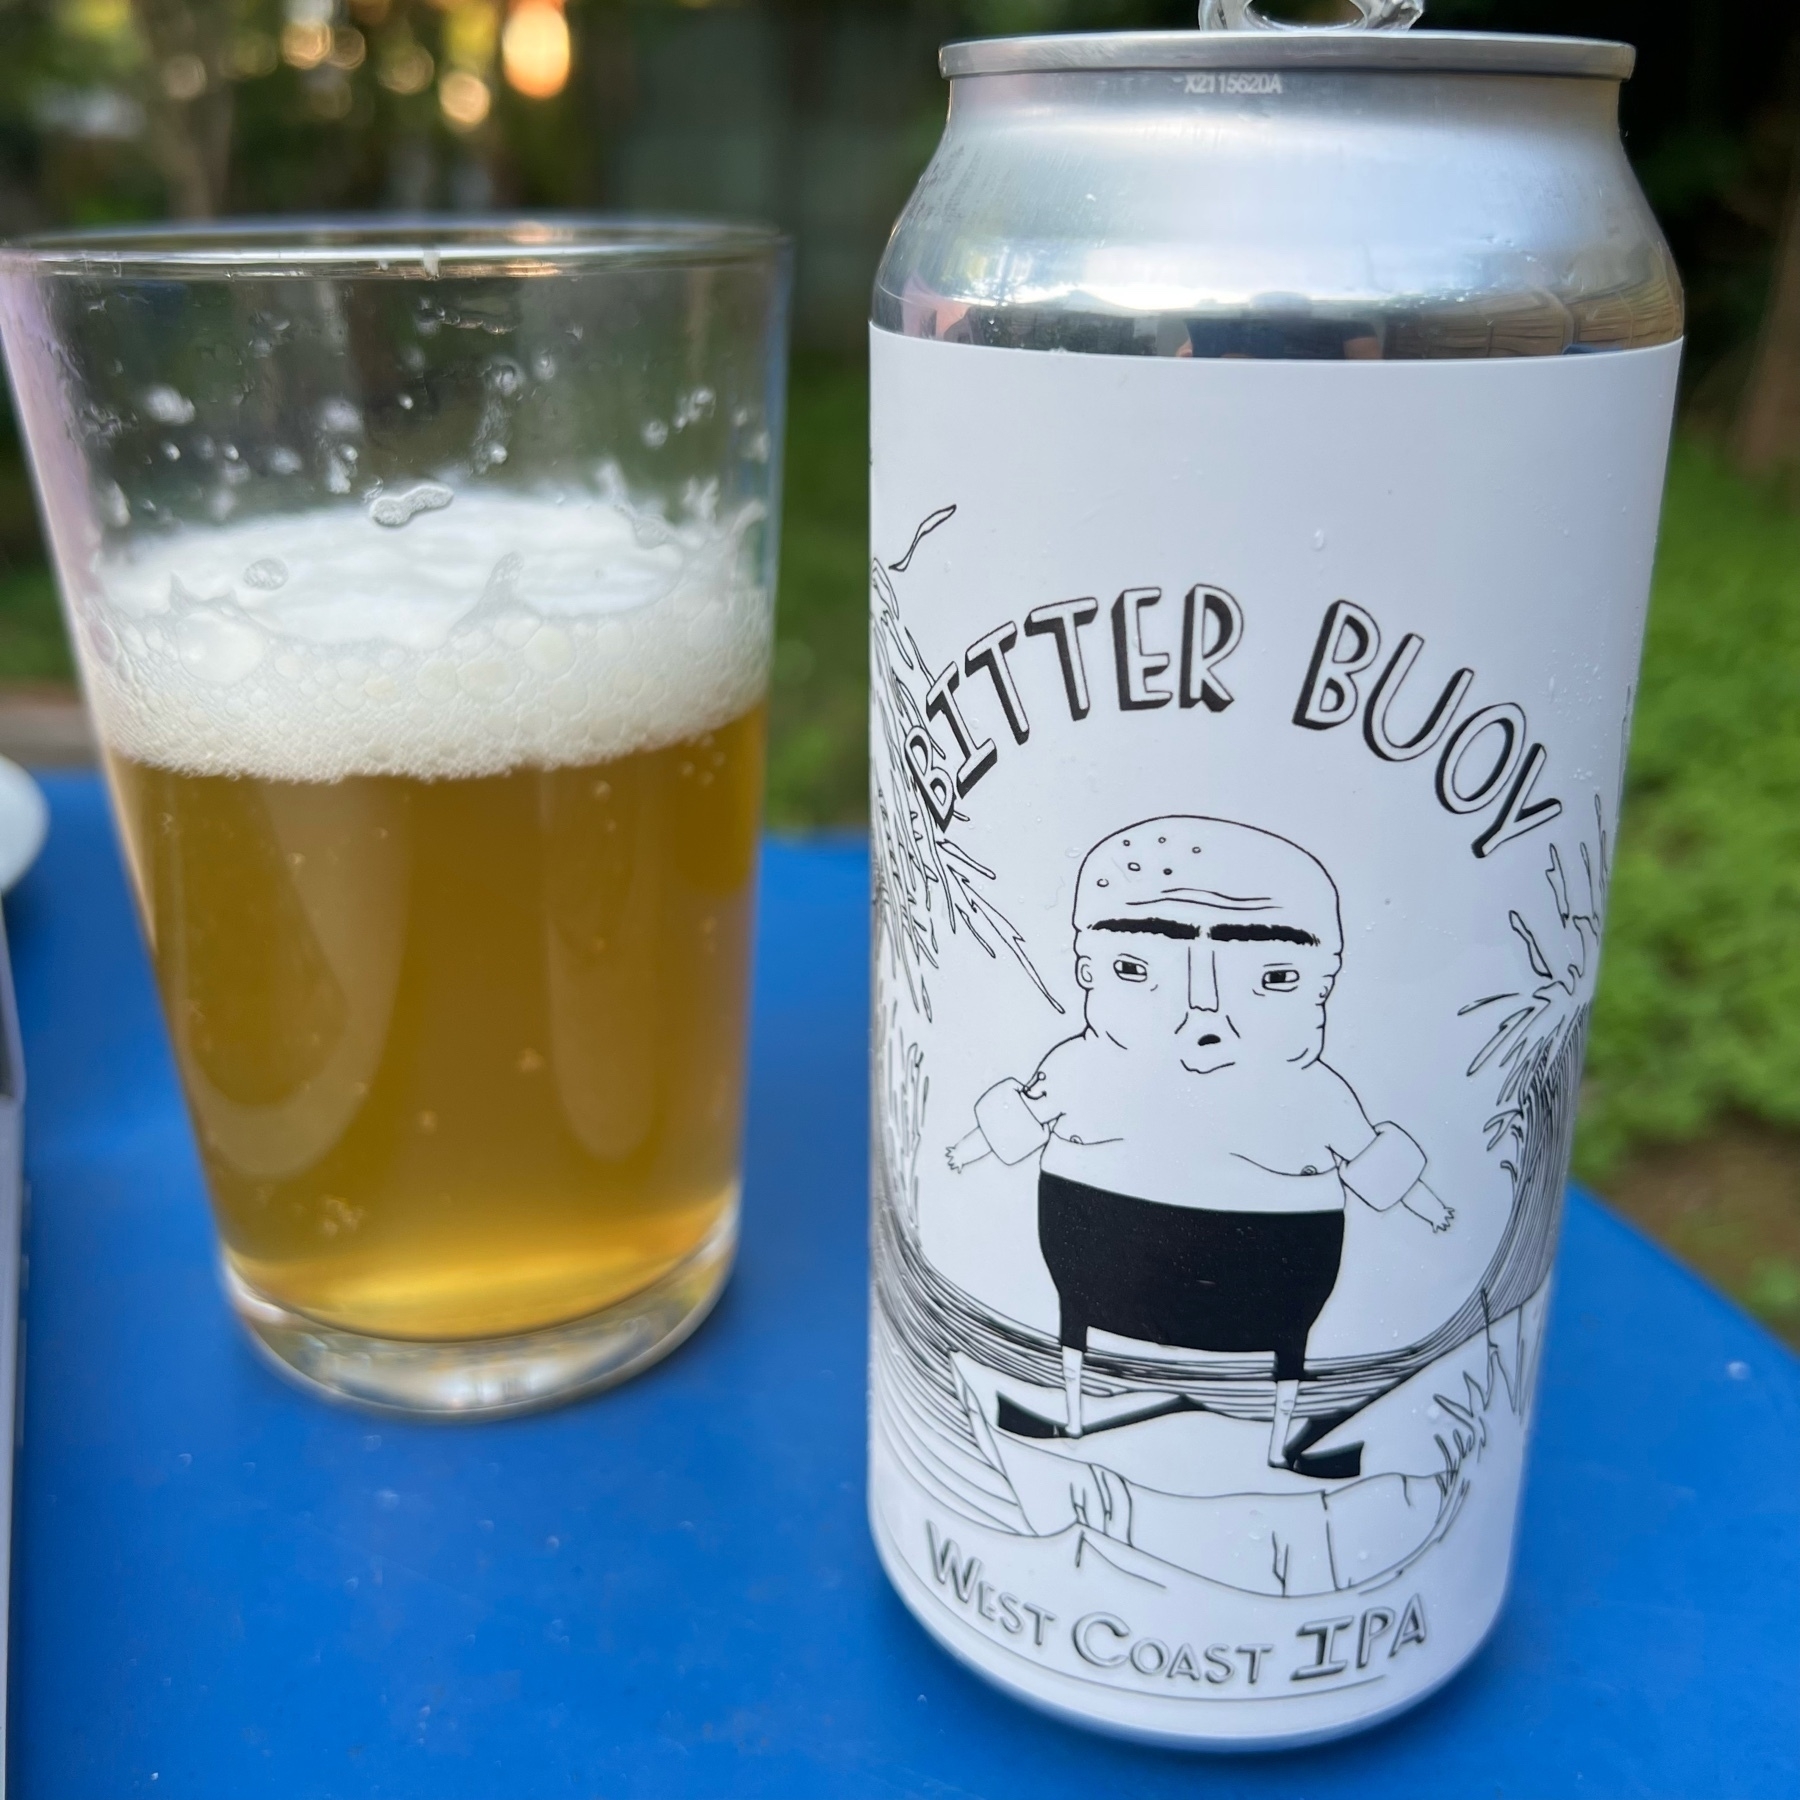 A pint glass half full of golden ale and a beer can with a monochrome design of a cartoon man with swimming floaties and the title “Bitter Buoy”